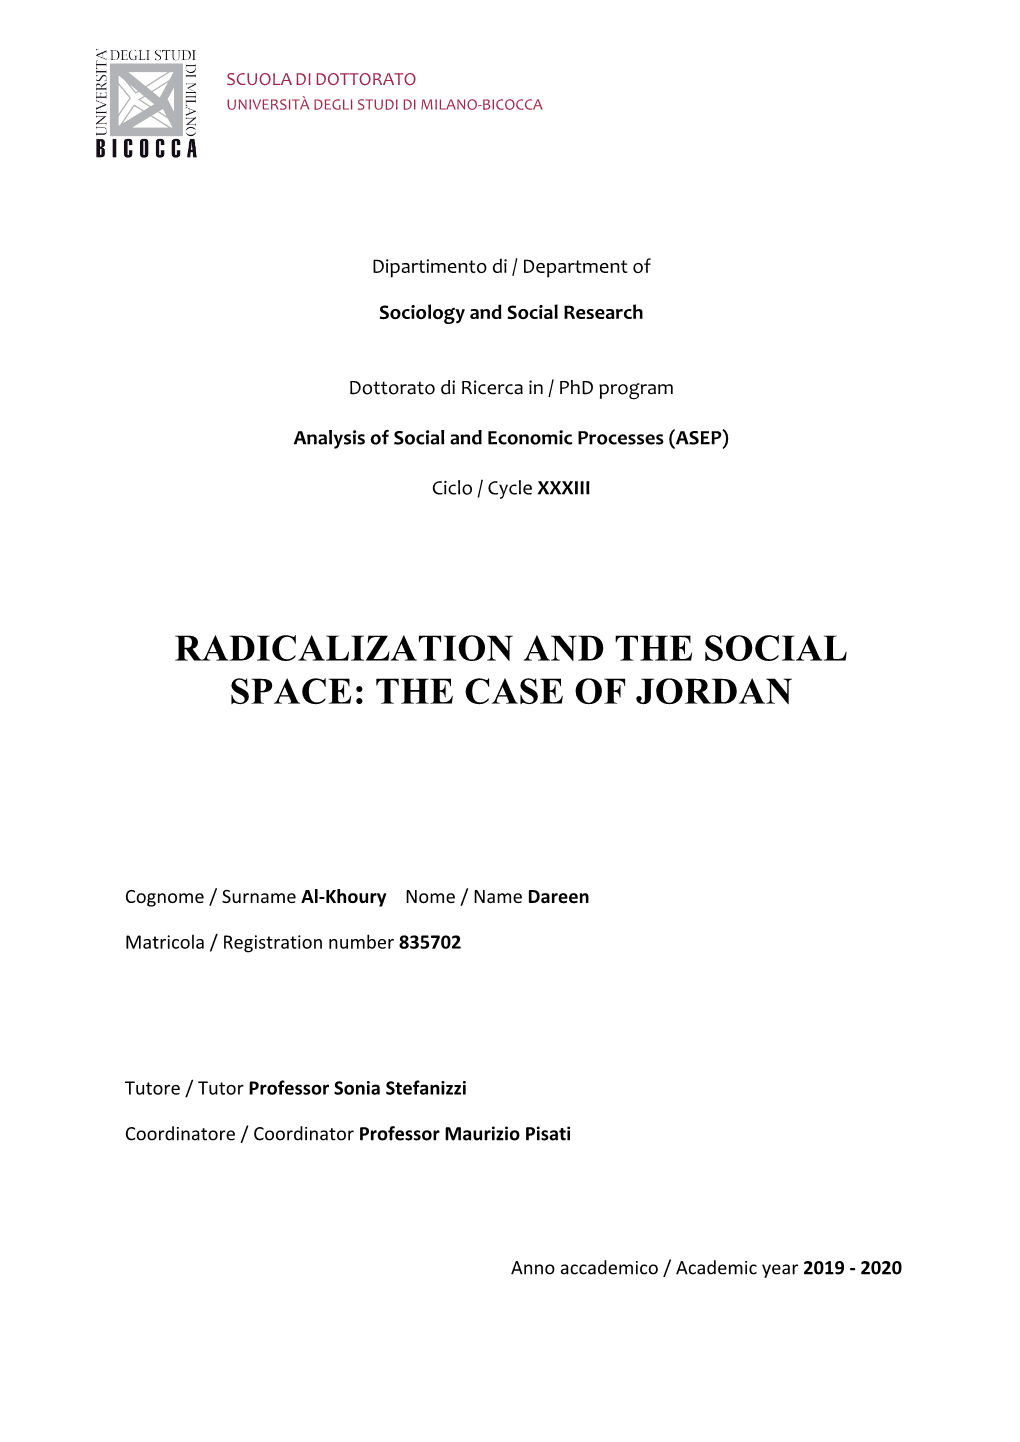 Radicalization and the Social Space: the Case of Jordan